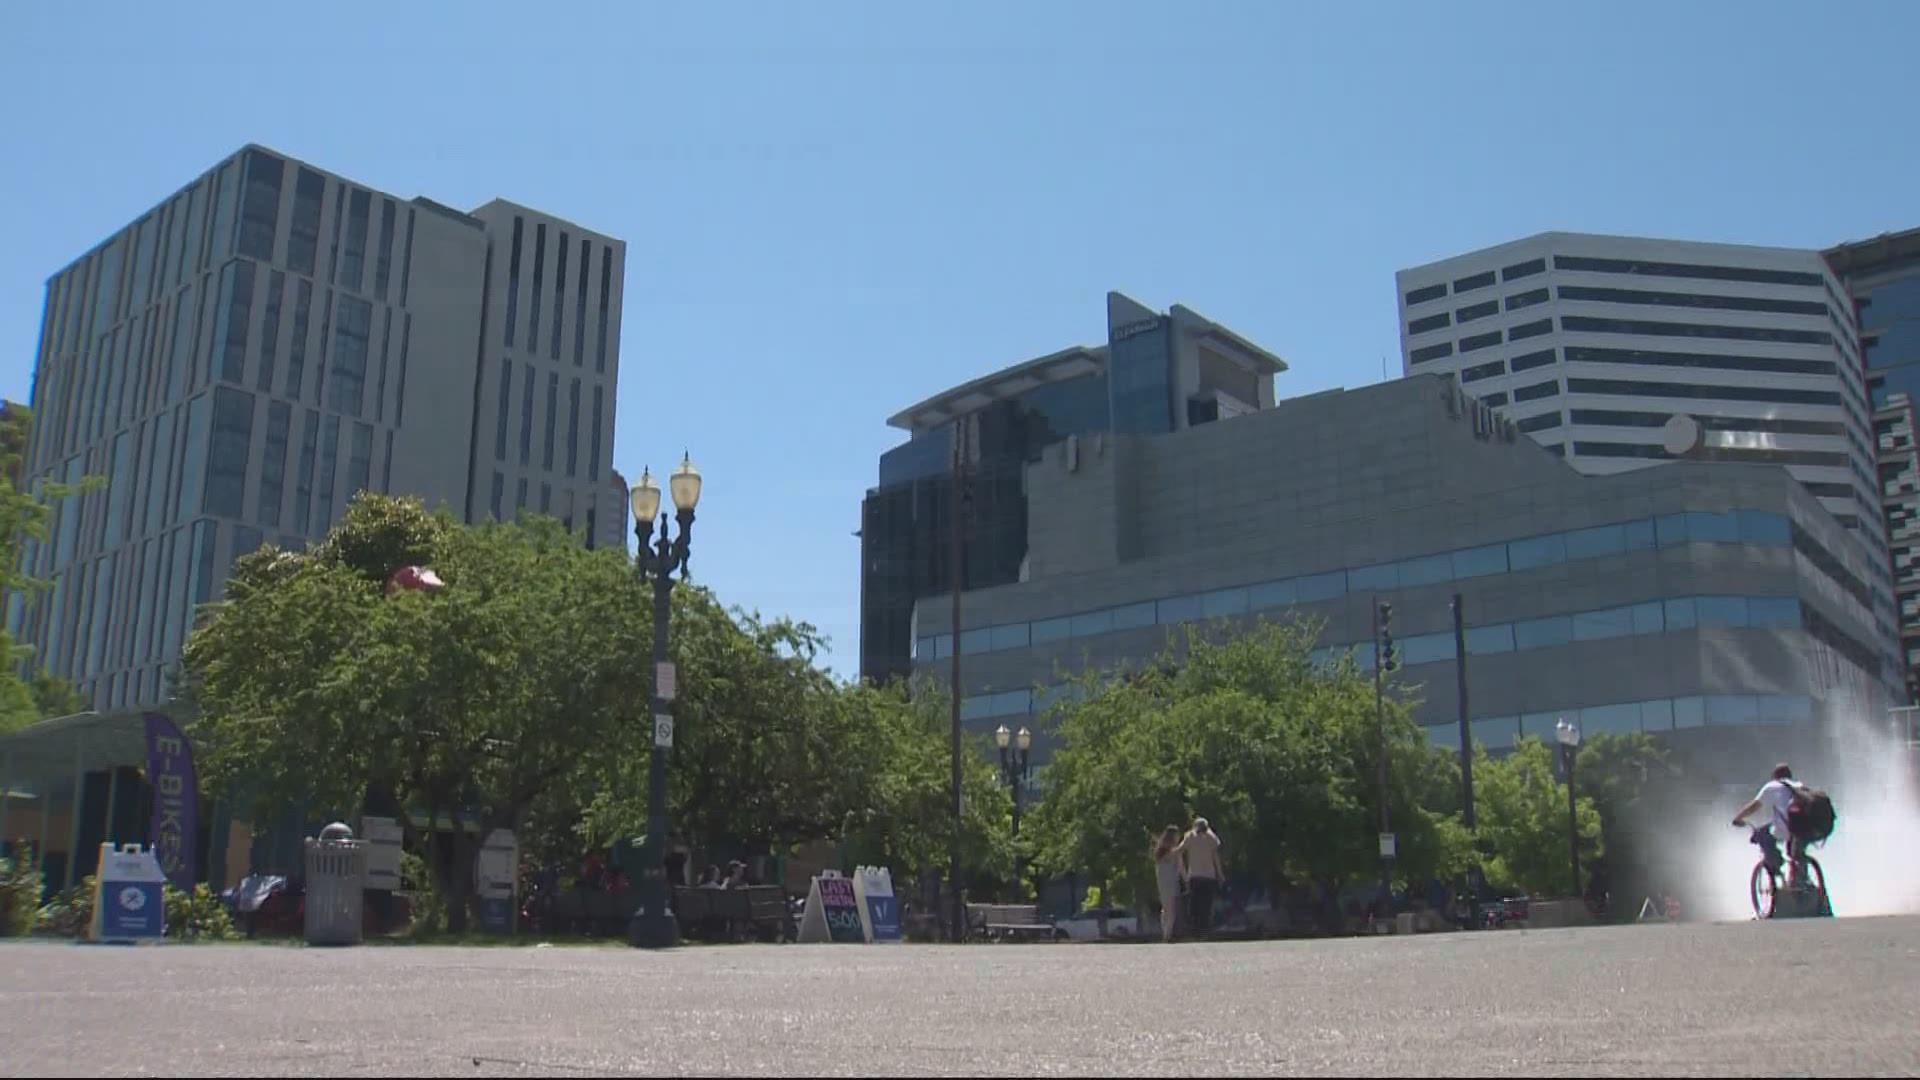 Triple-digit heat is expected to break records in Portland this weekend. KGW's Katherine Cook shares important tips on things to do, and not do, to stay cool.